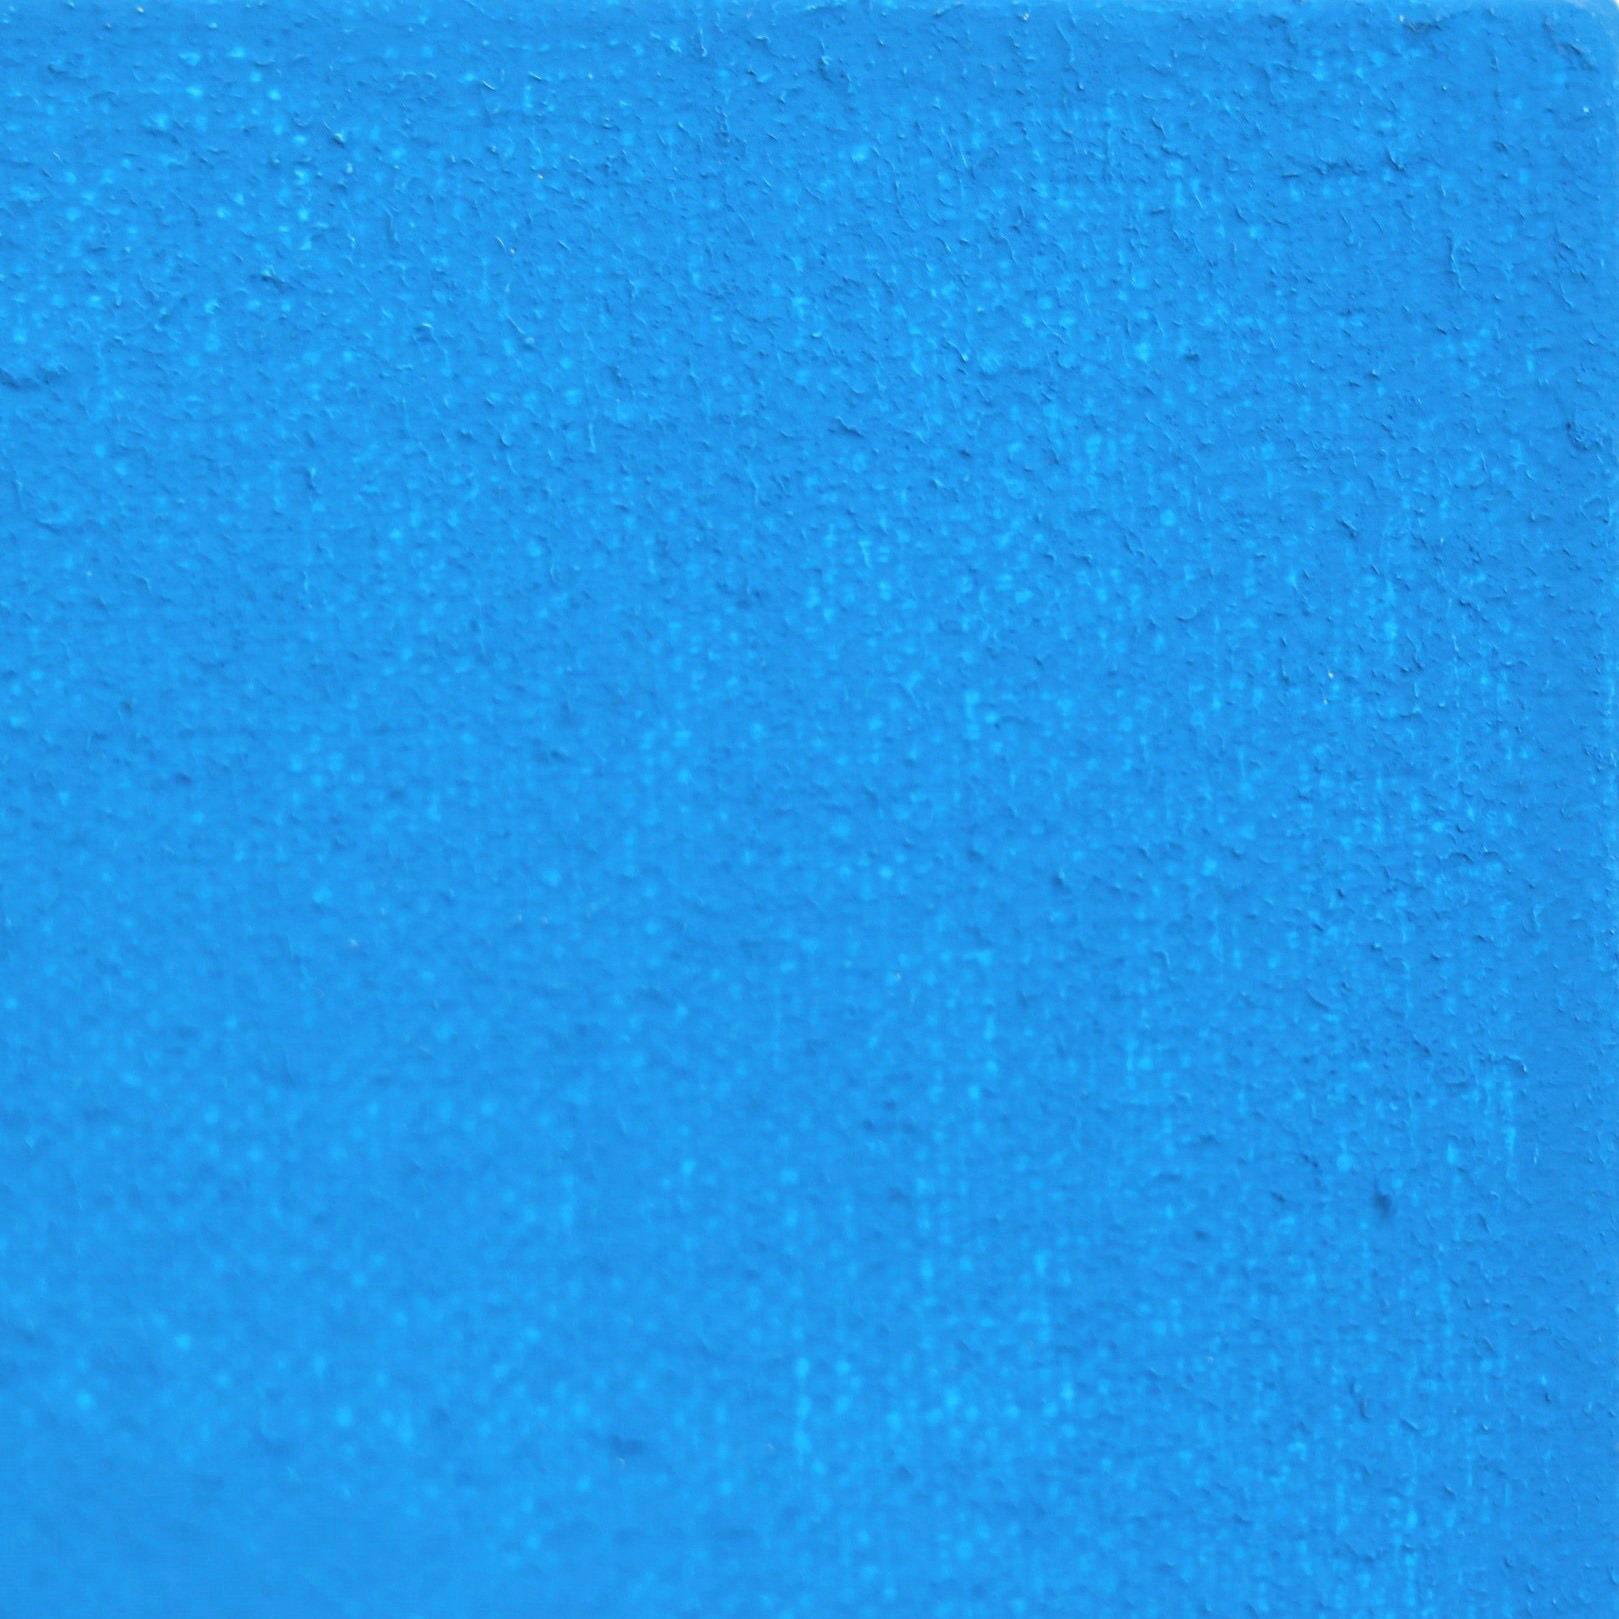 Slims SBBF - Three-dimensional Minimalist Blue Abstract Painting For Sale 3